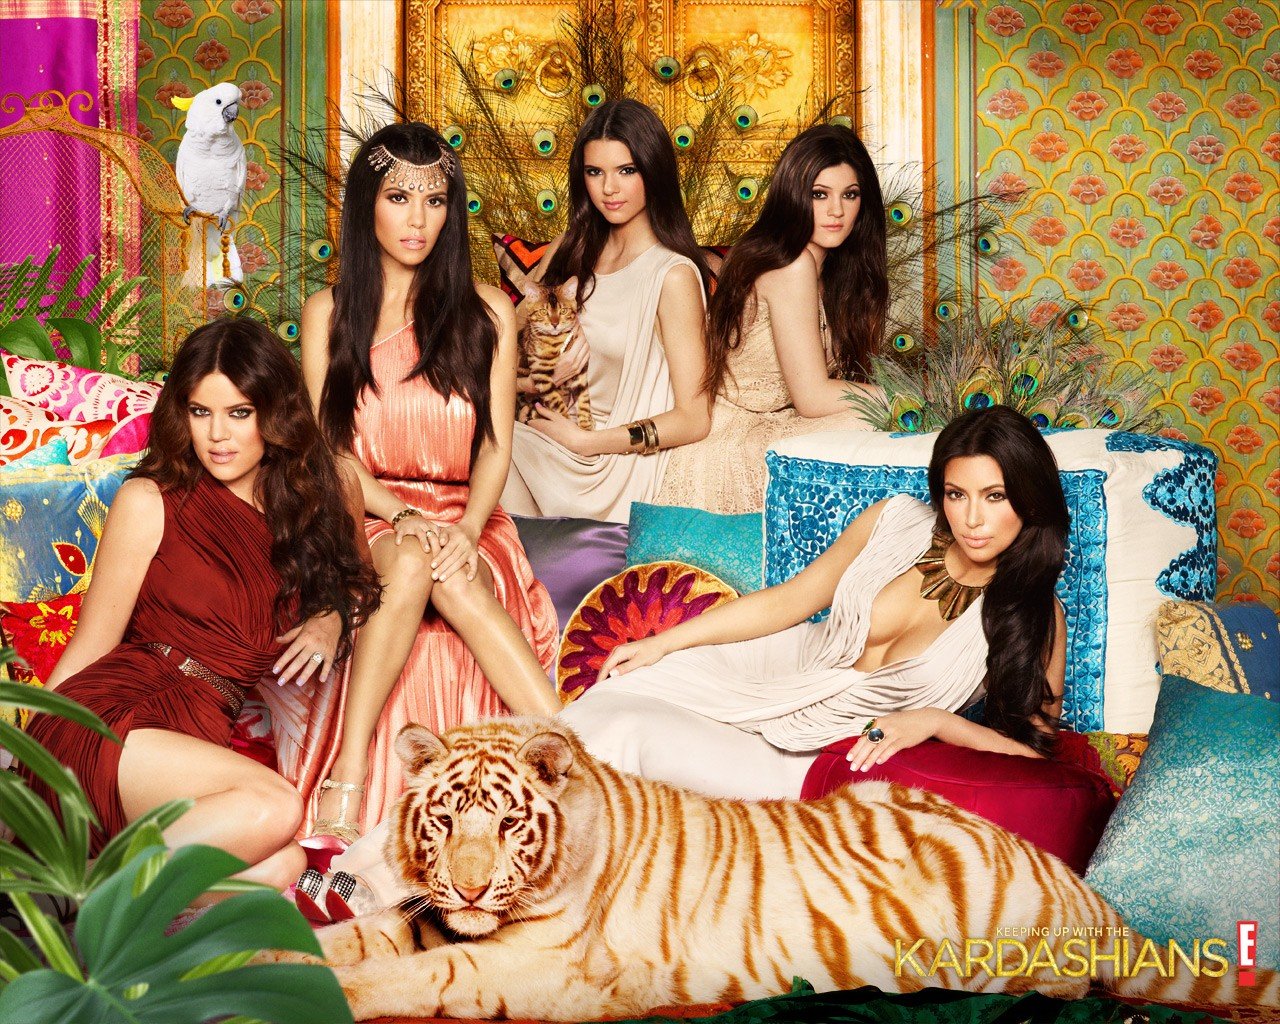 ... Keeping Up With The Kardashians ...